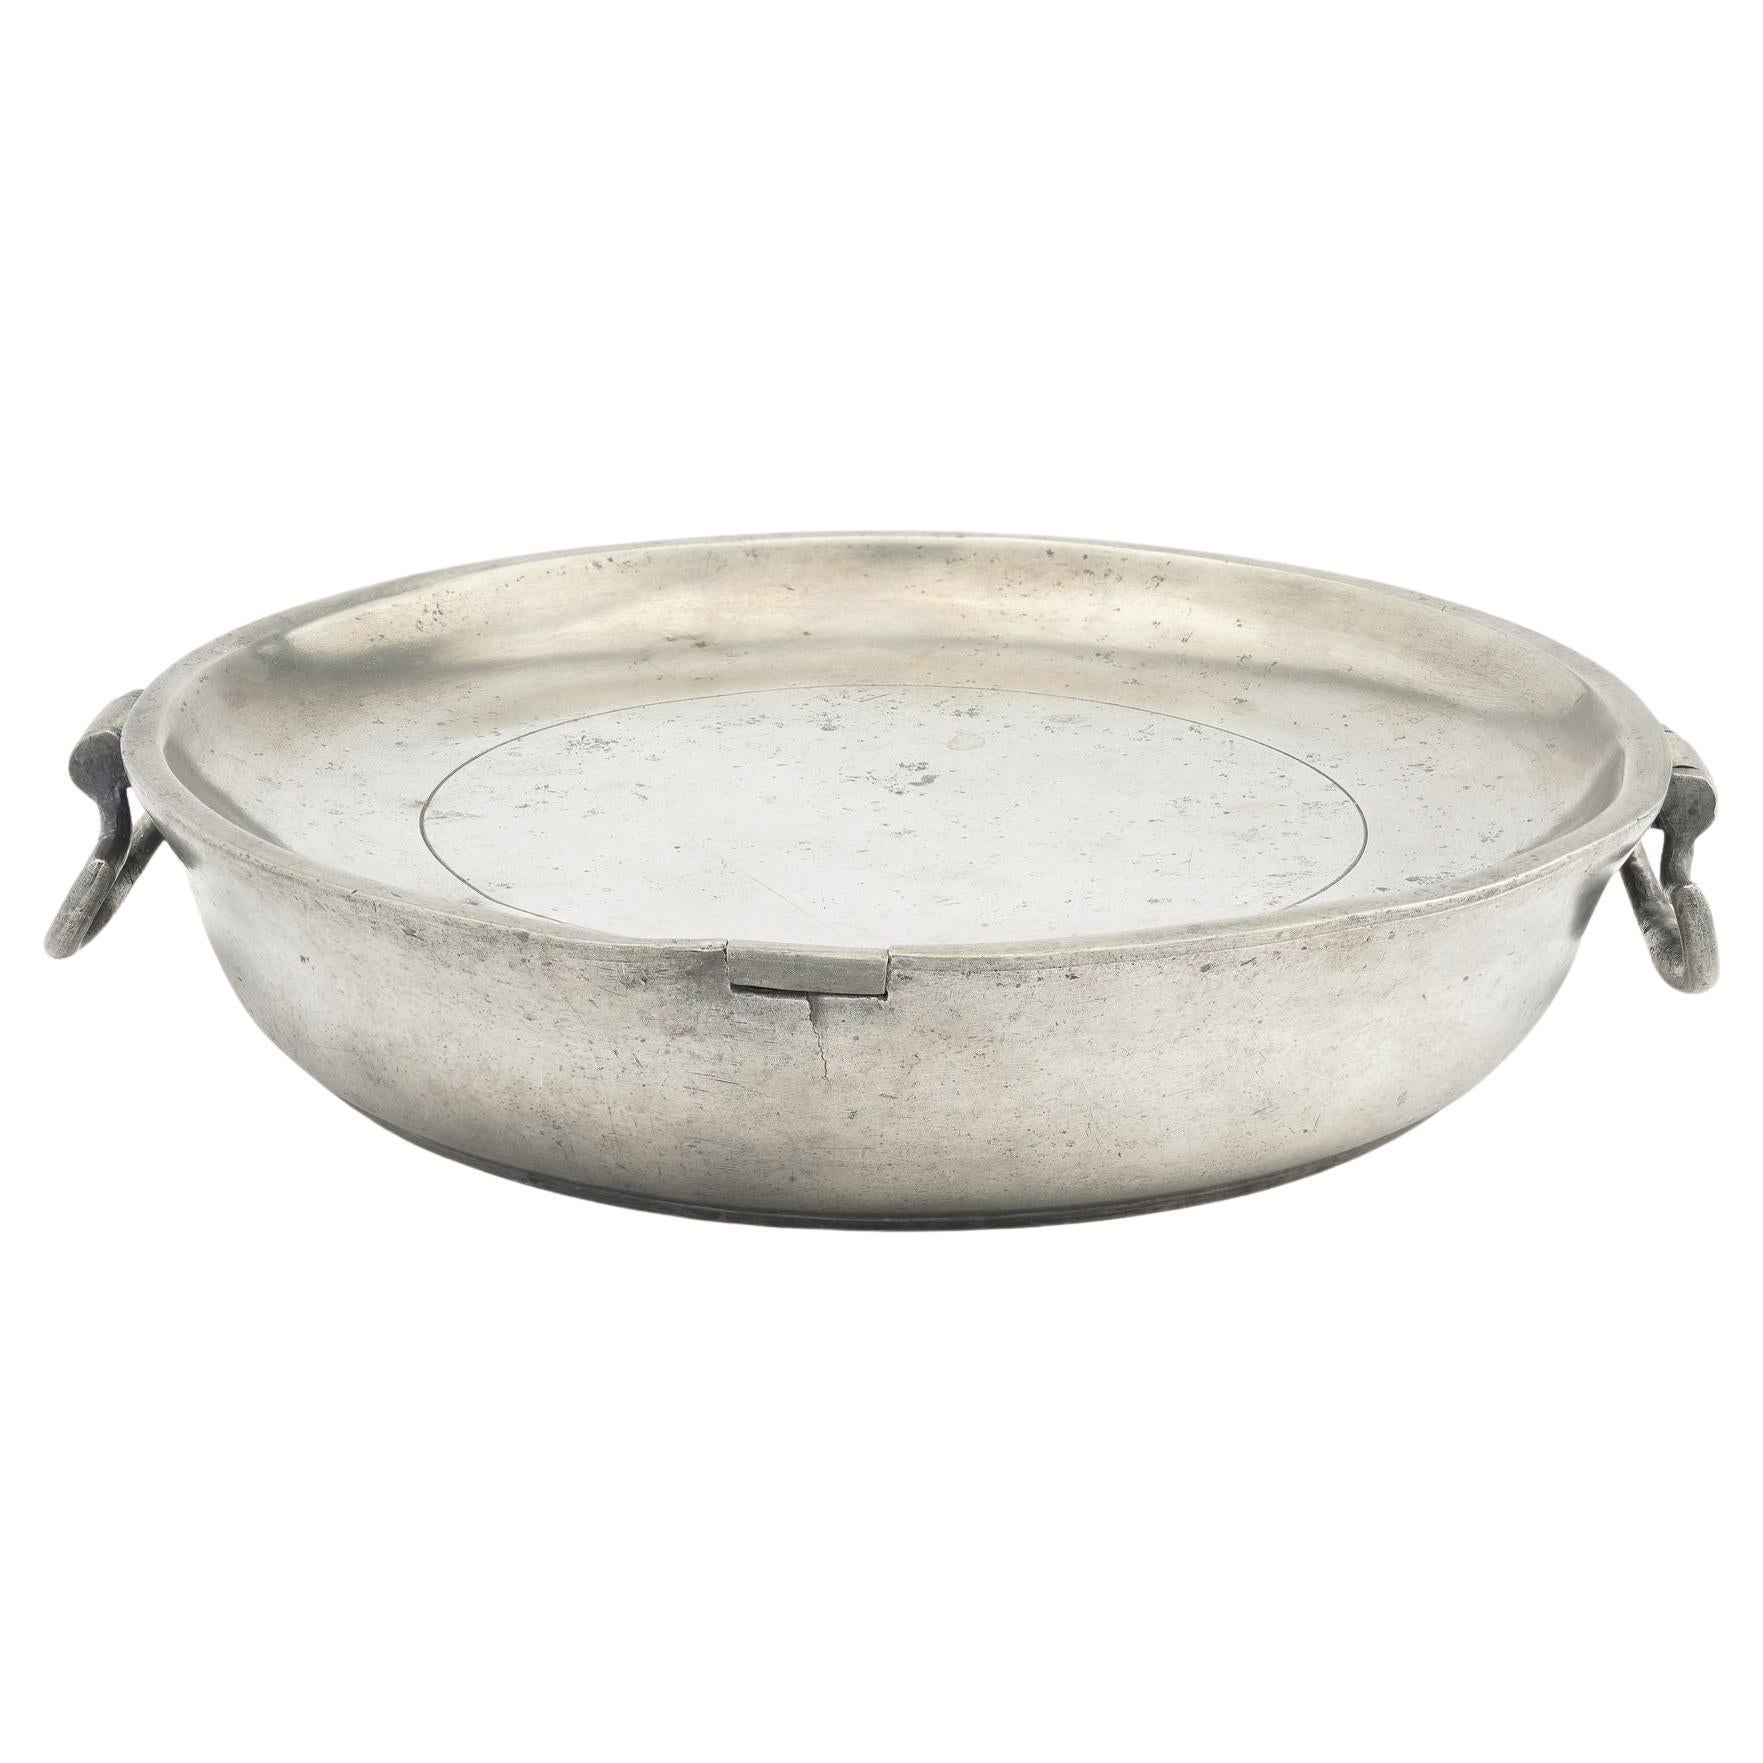 English pewter warming plate with drop handles by V&W Birmingham, 1808-1827